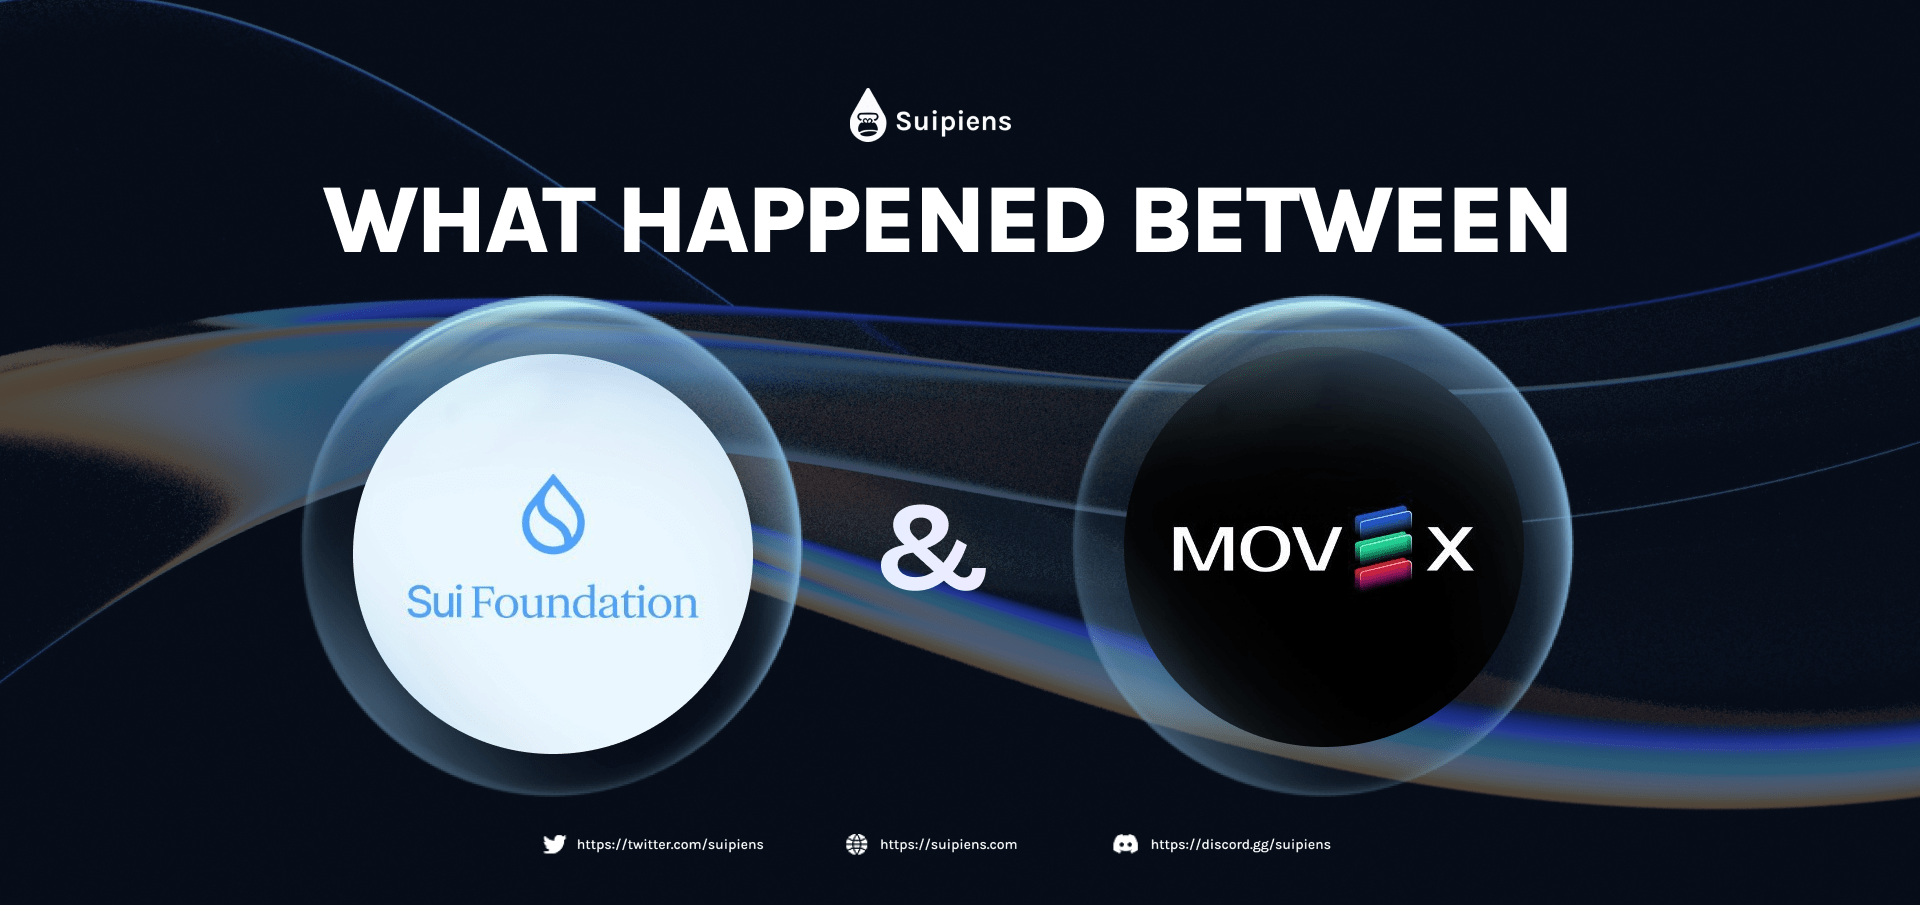 What happened between Sui Foundation and MovEX?